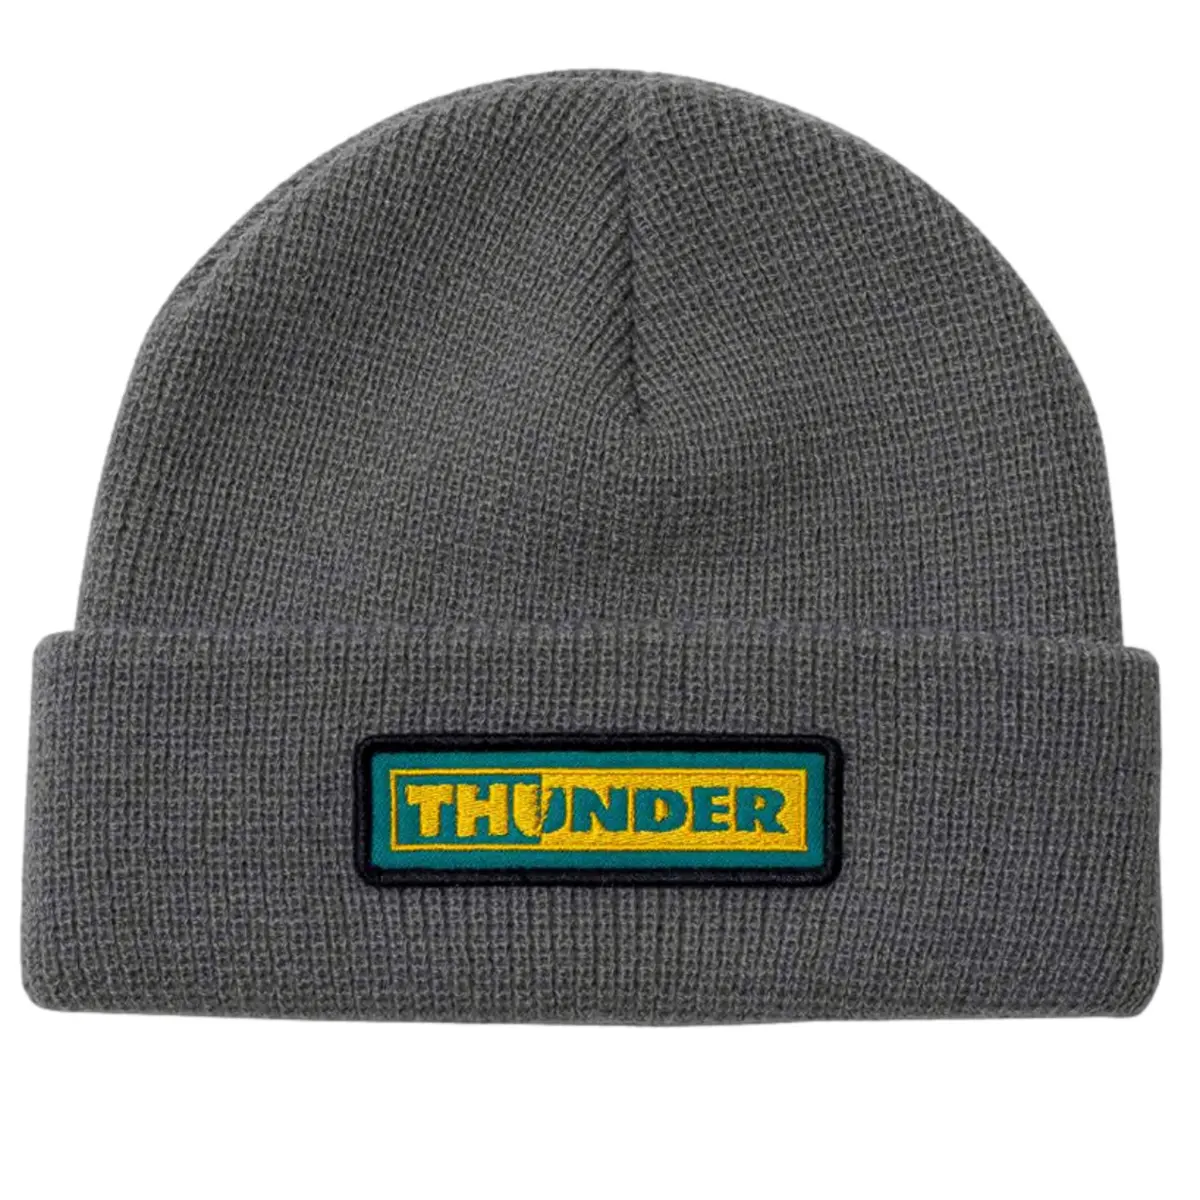 Thunder bolts beanie patch grey